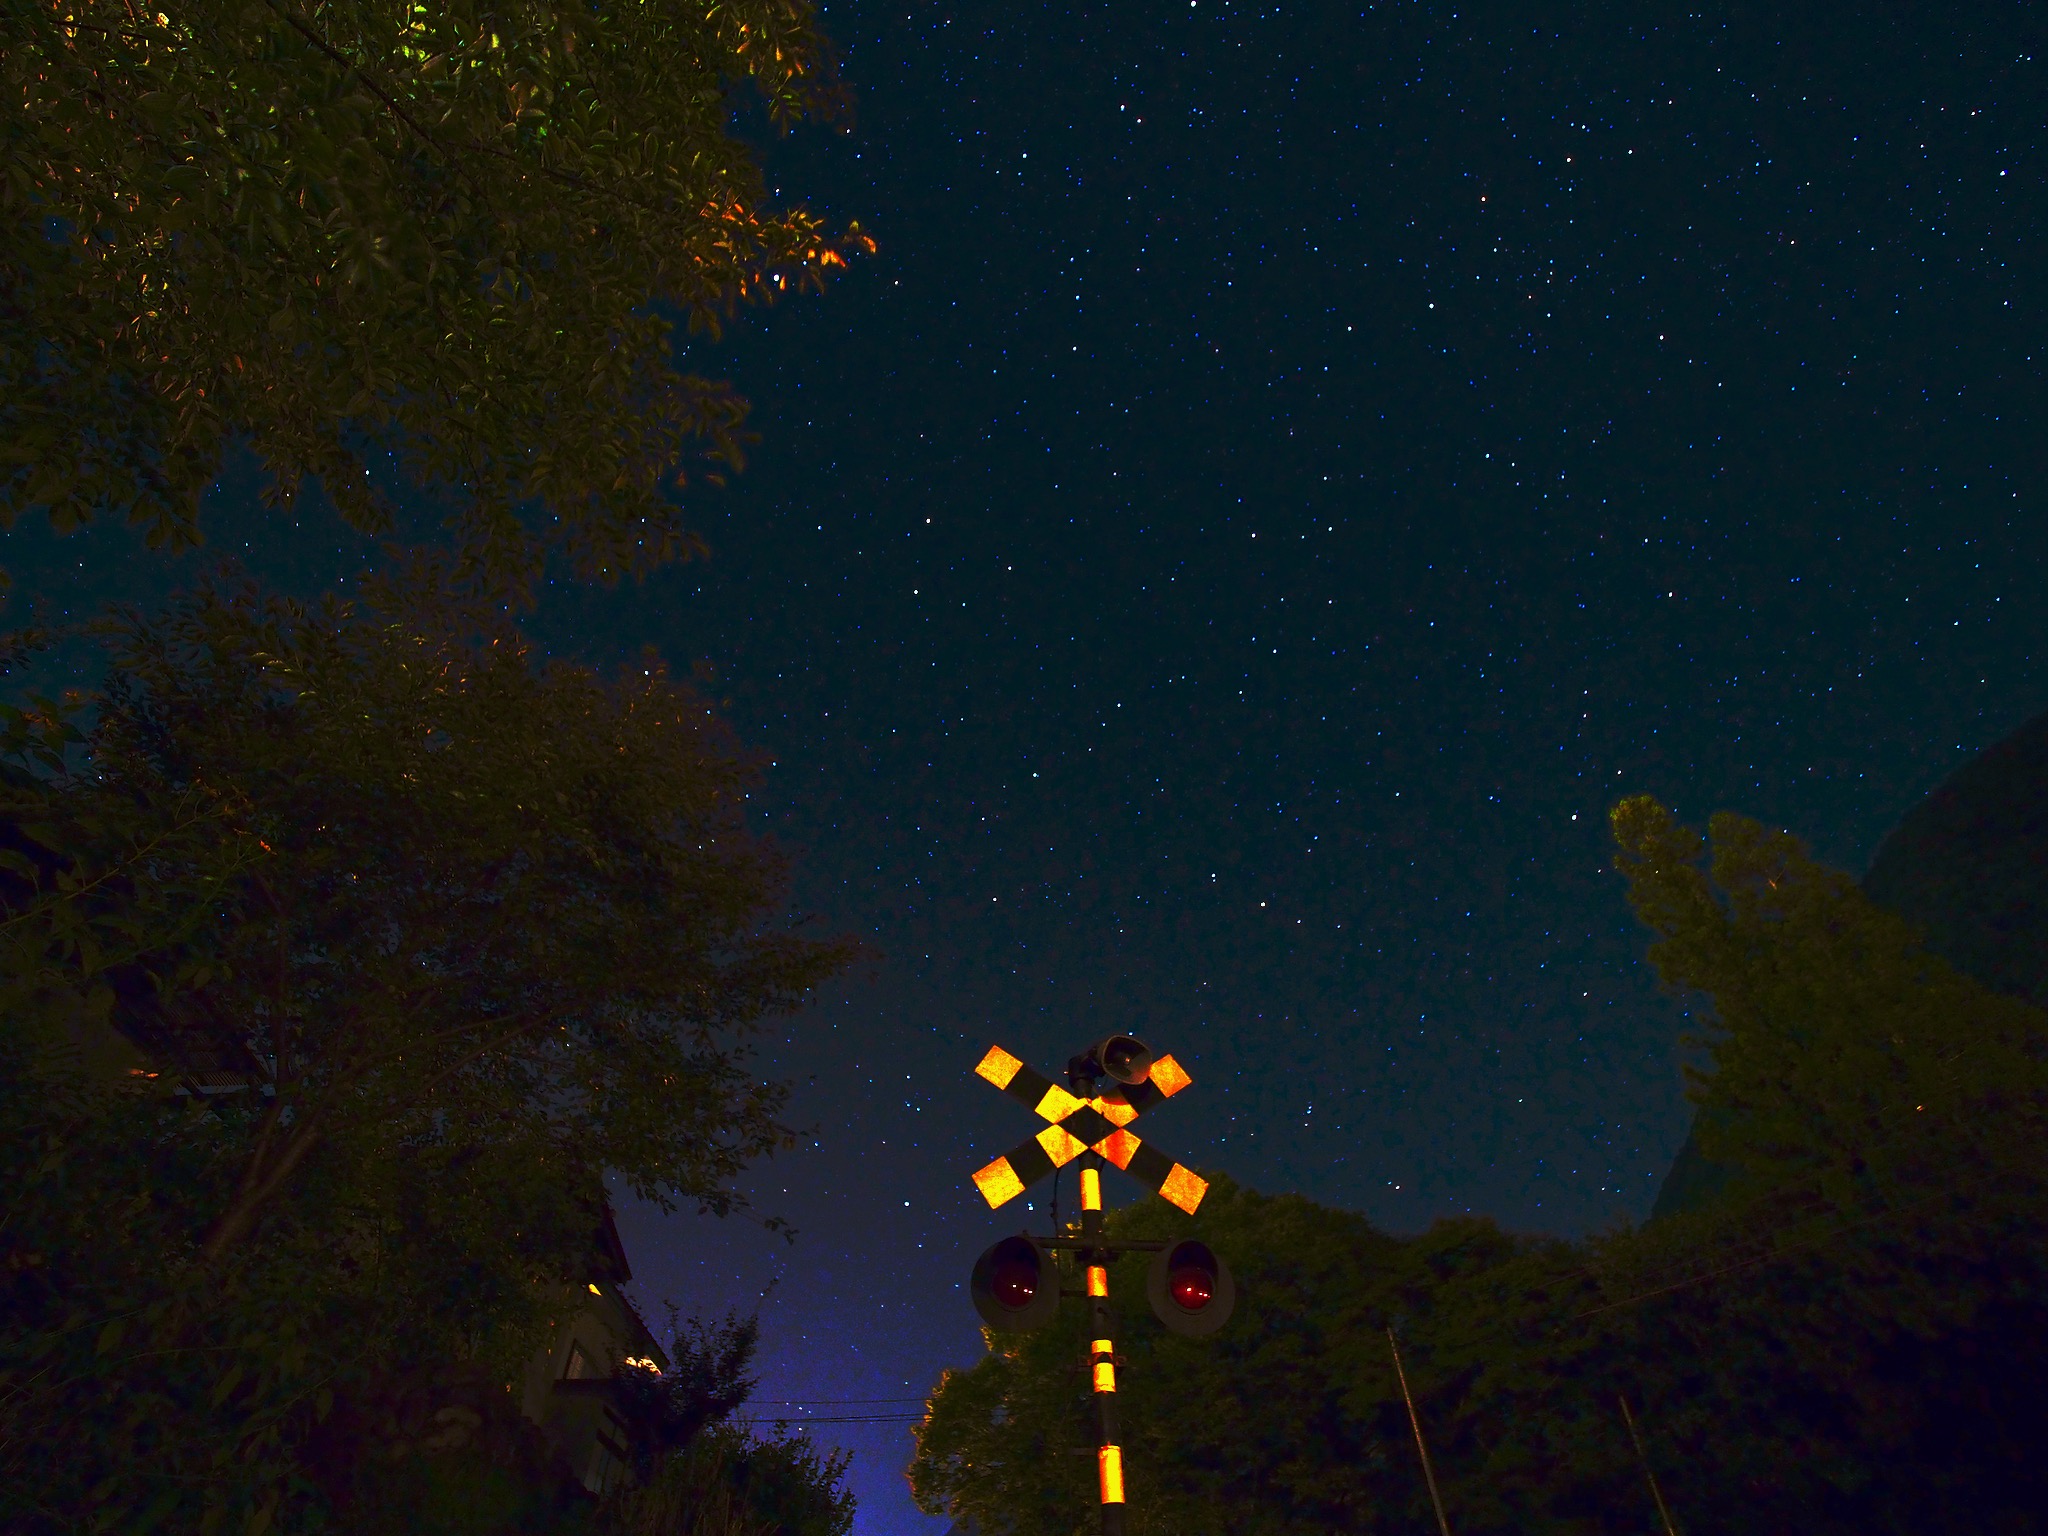 Stars and a signal of level crossing